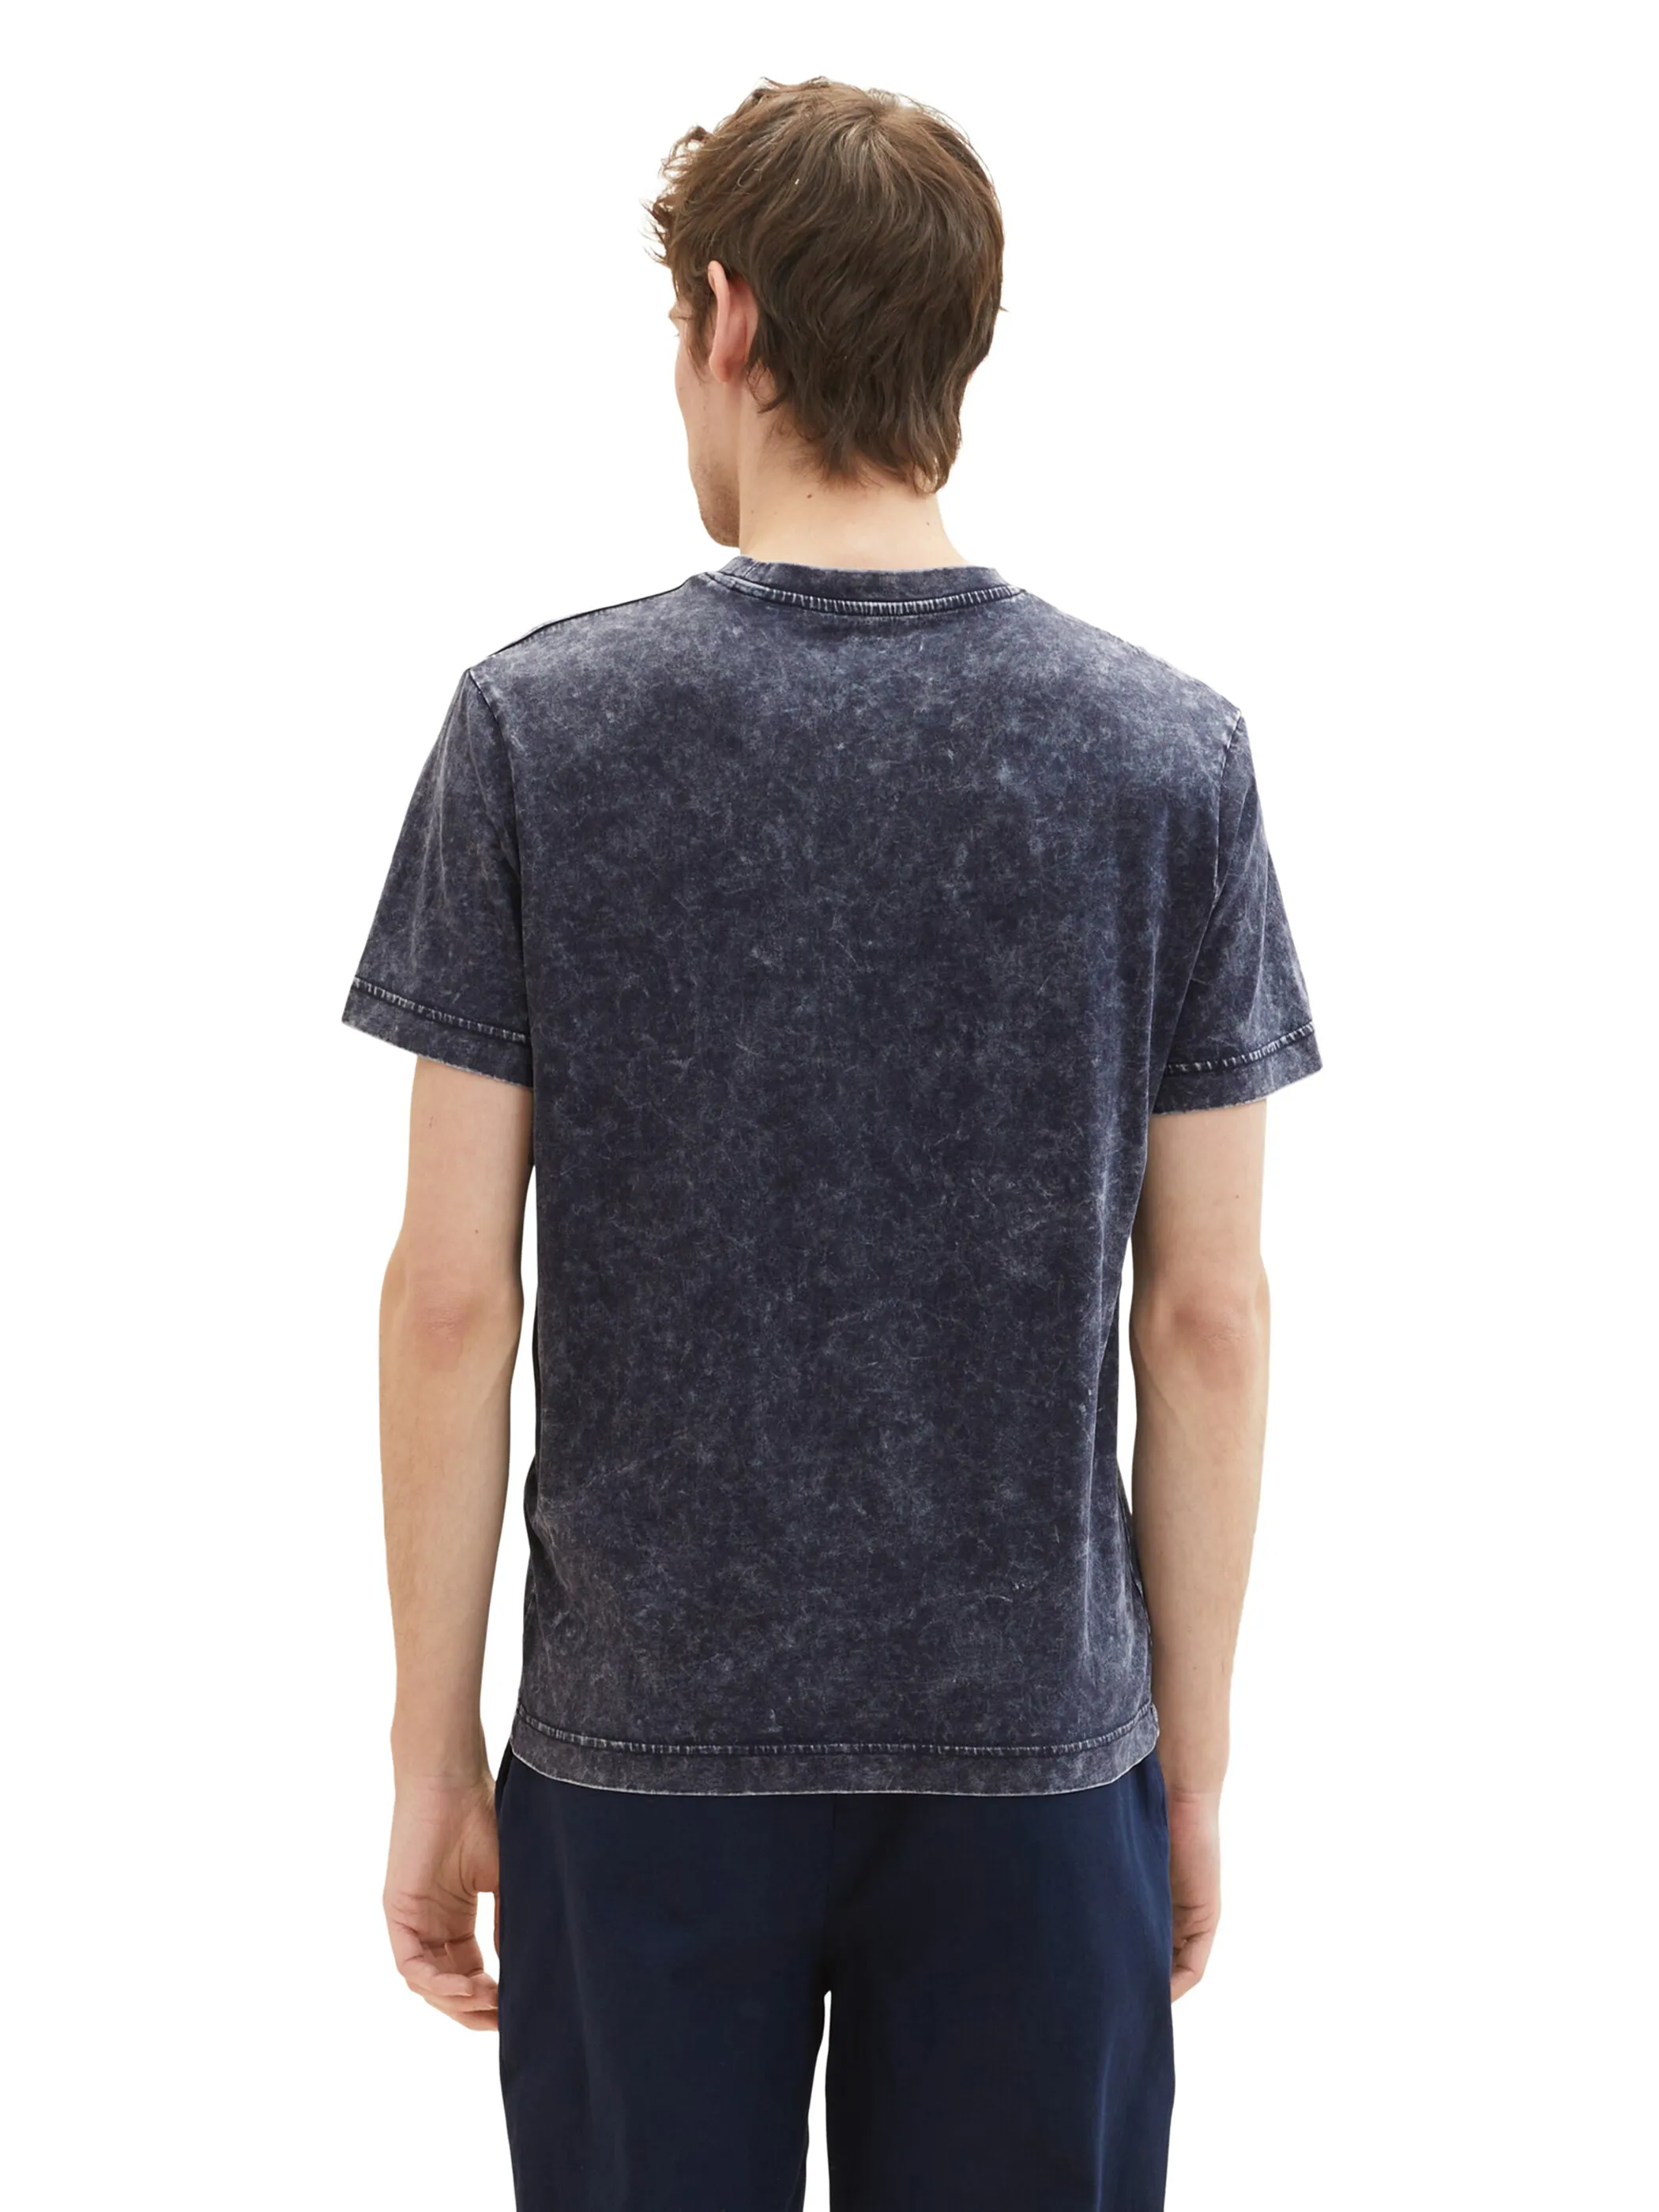 Tom Tailor 1036431 washed t-shirt with print Blau 880536 10668 2